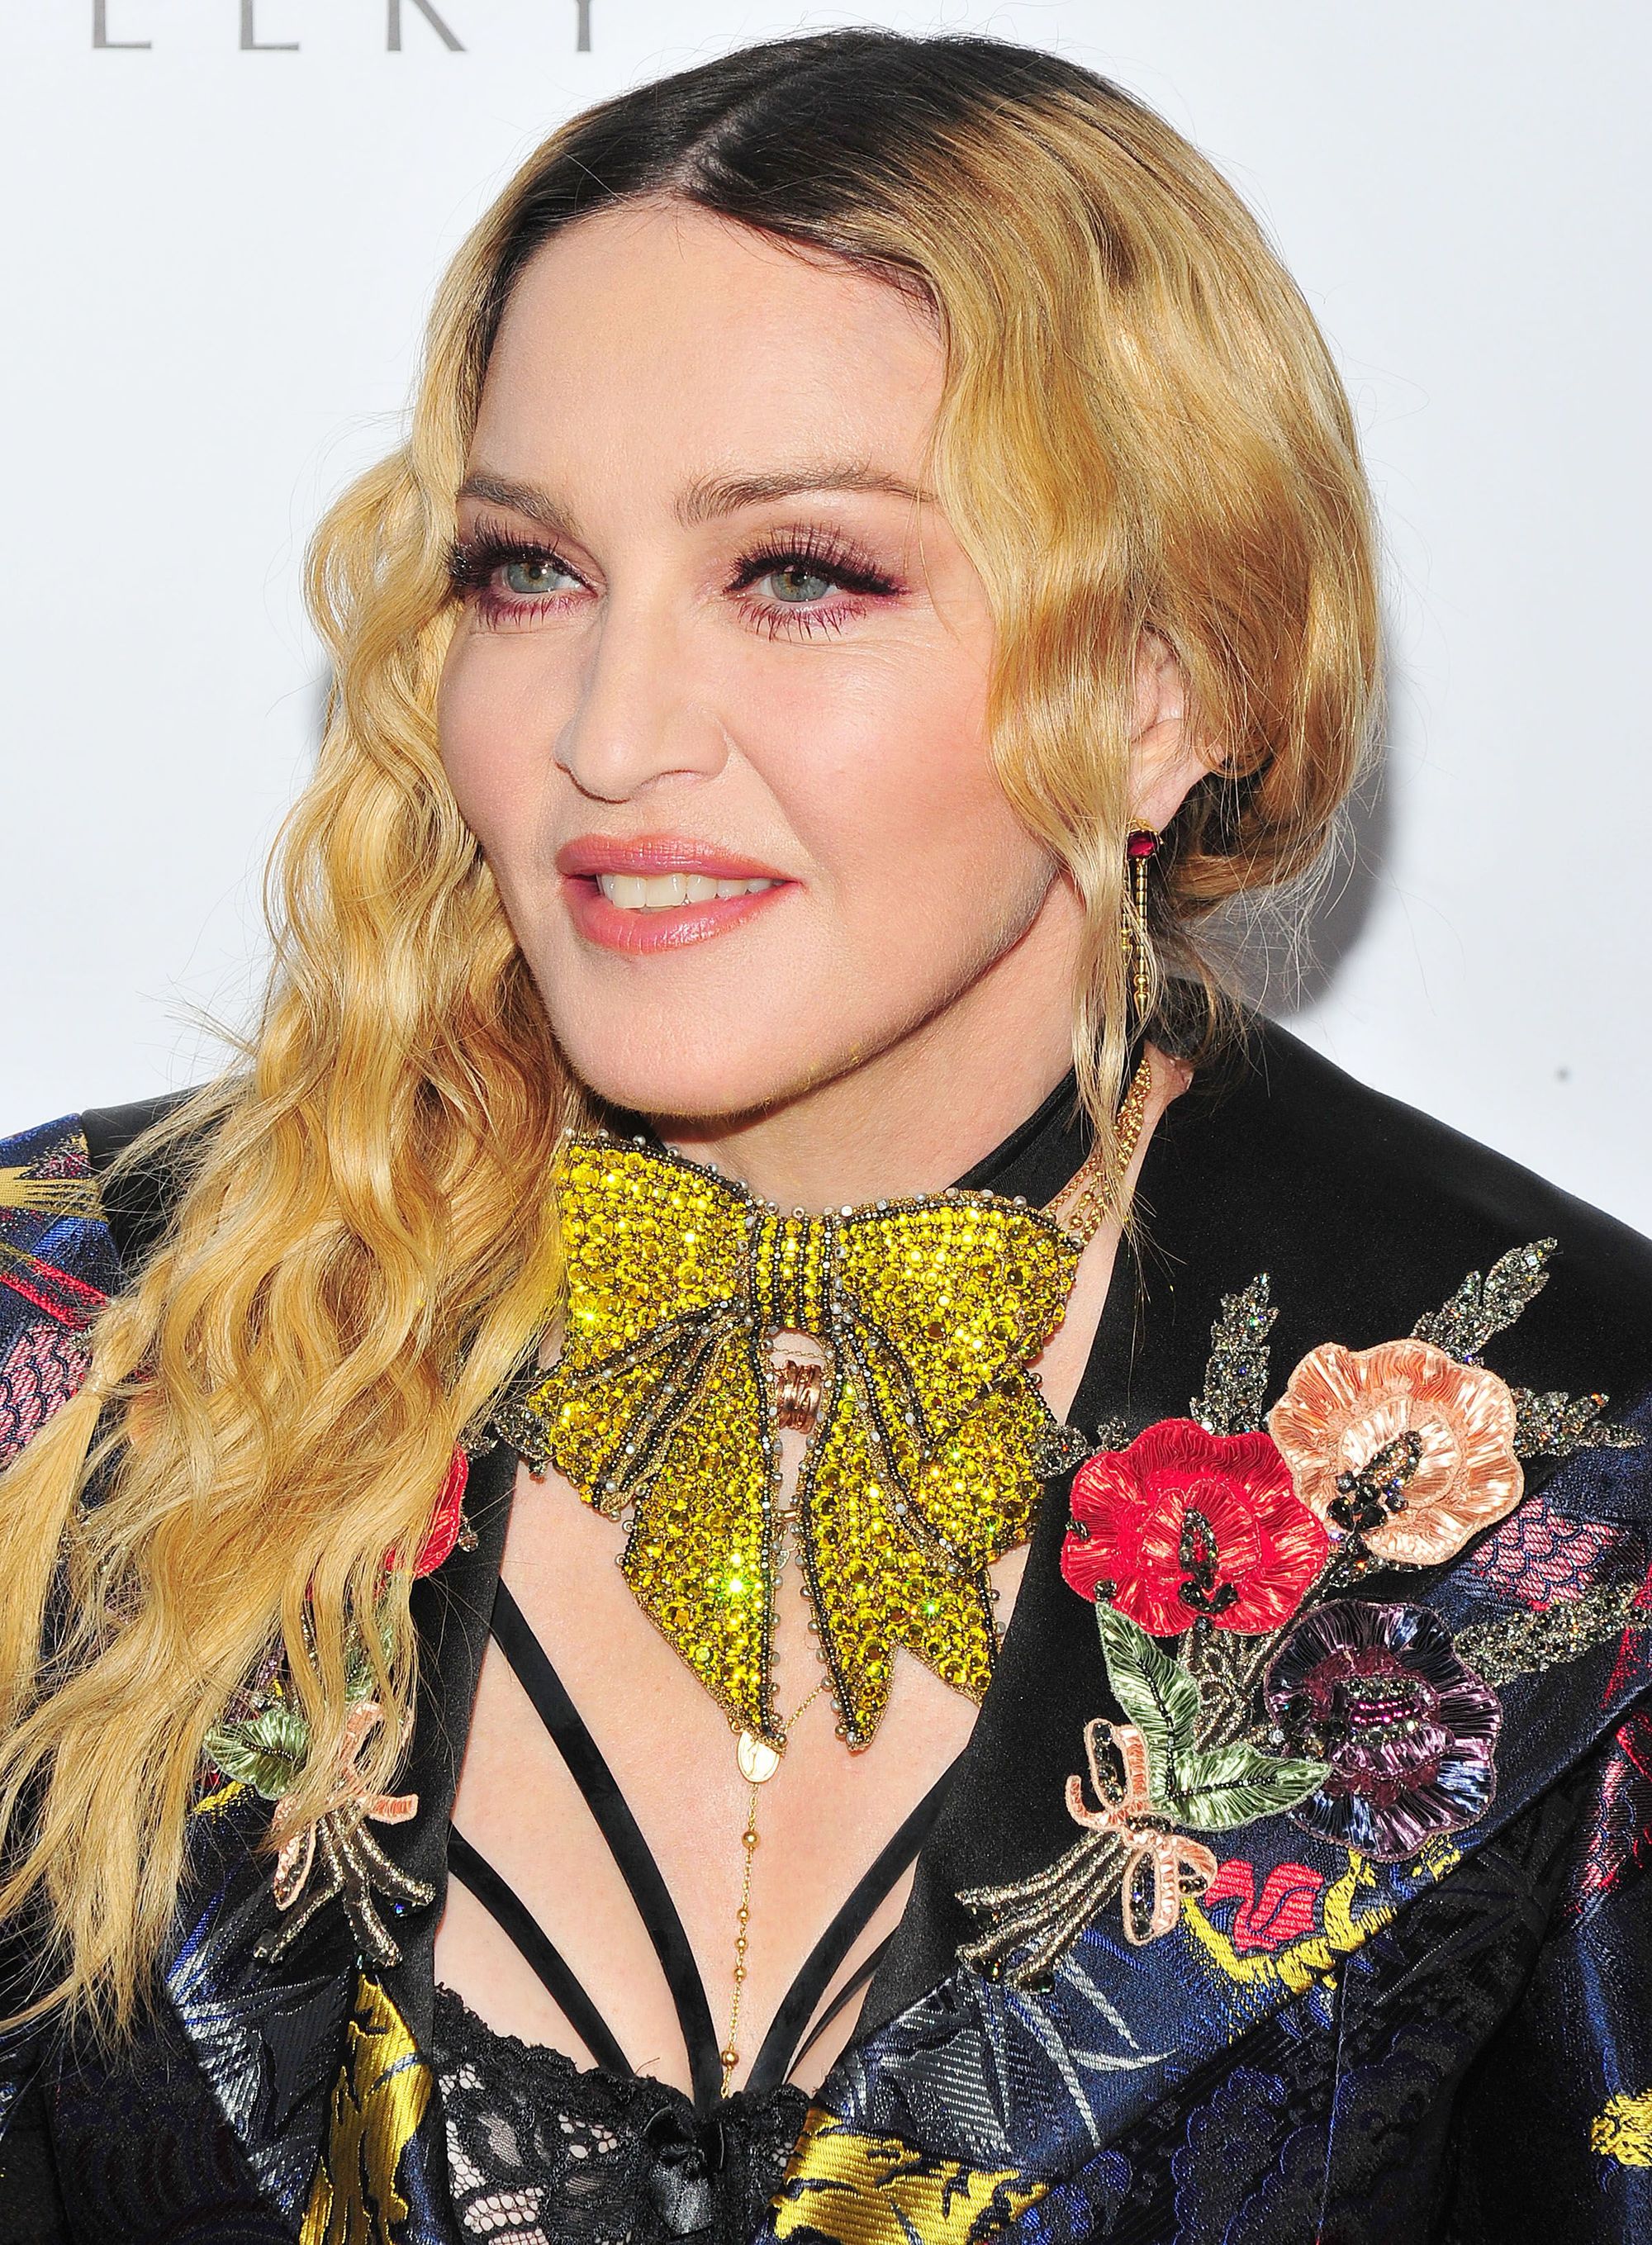 Madonna on the red carpet in 2016 with long blonde wavy hair swept over one shoulder.